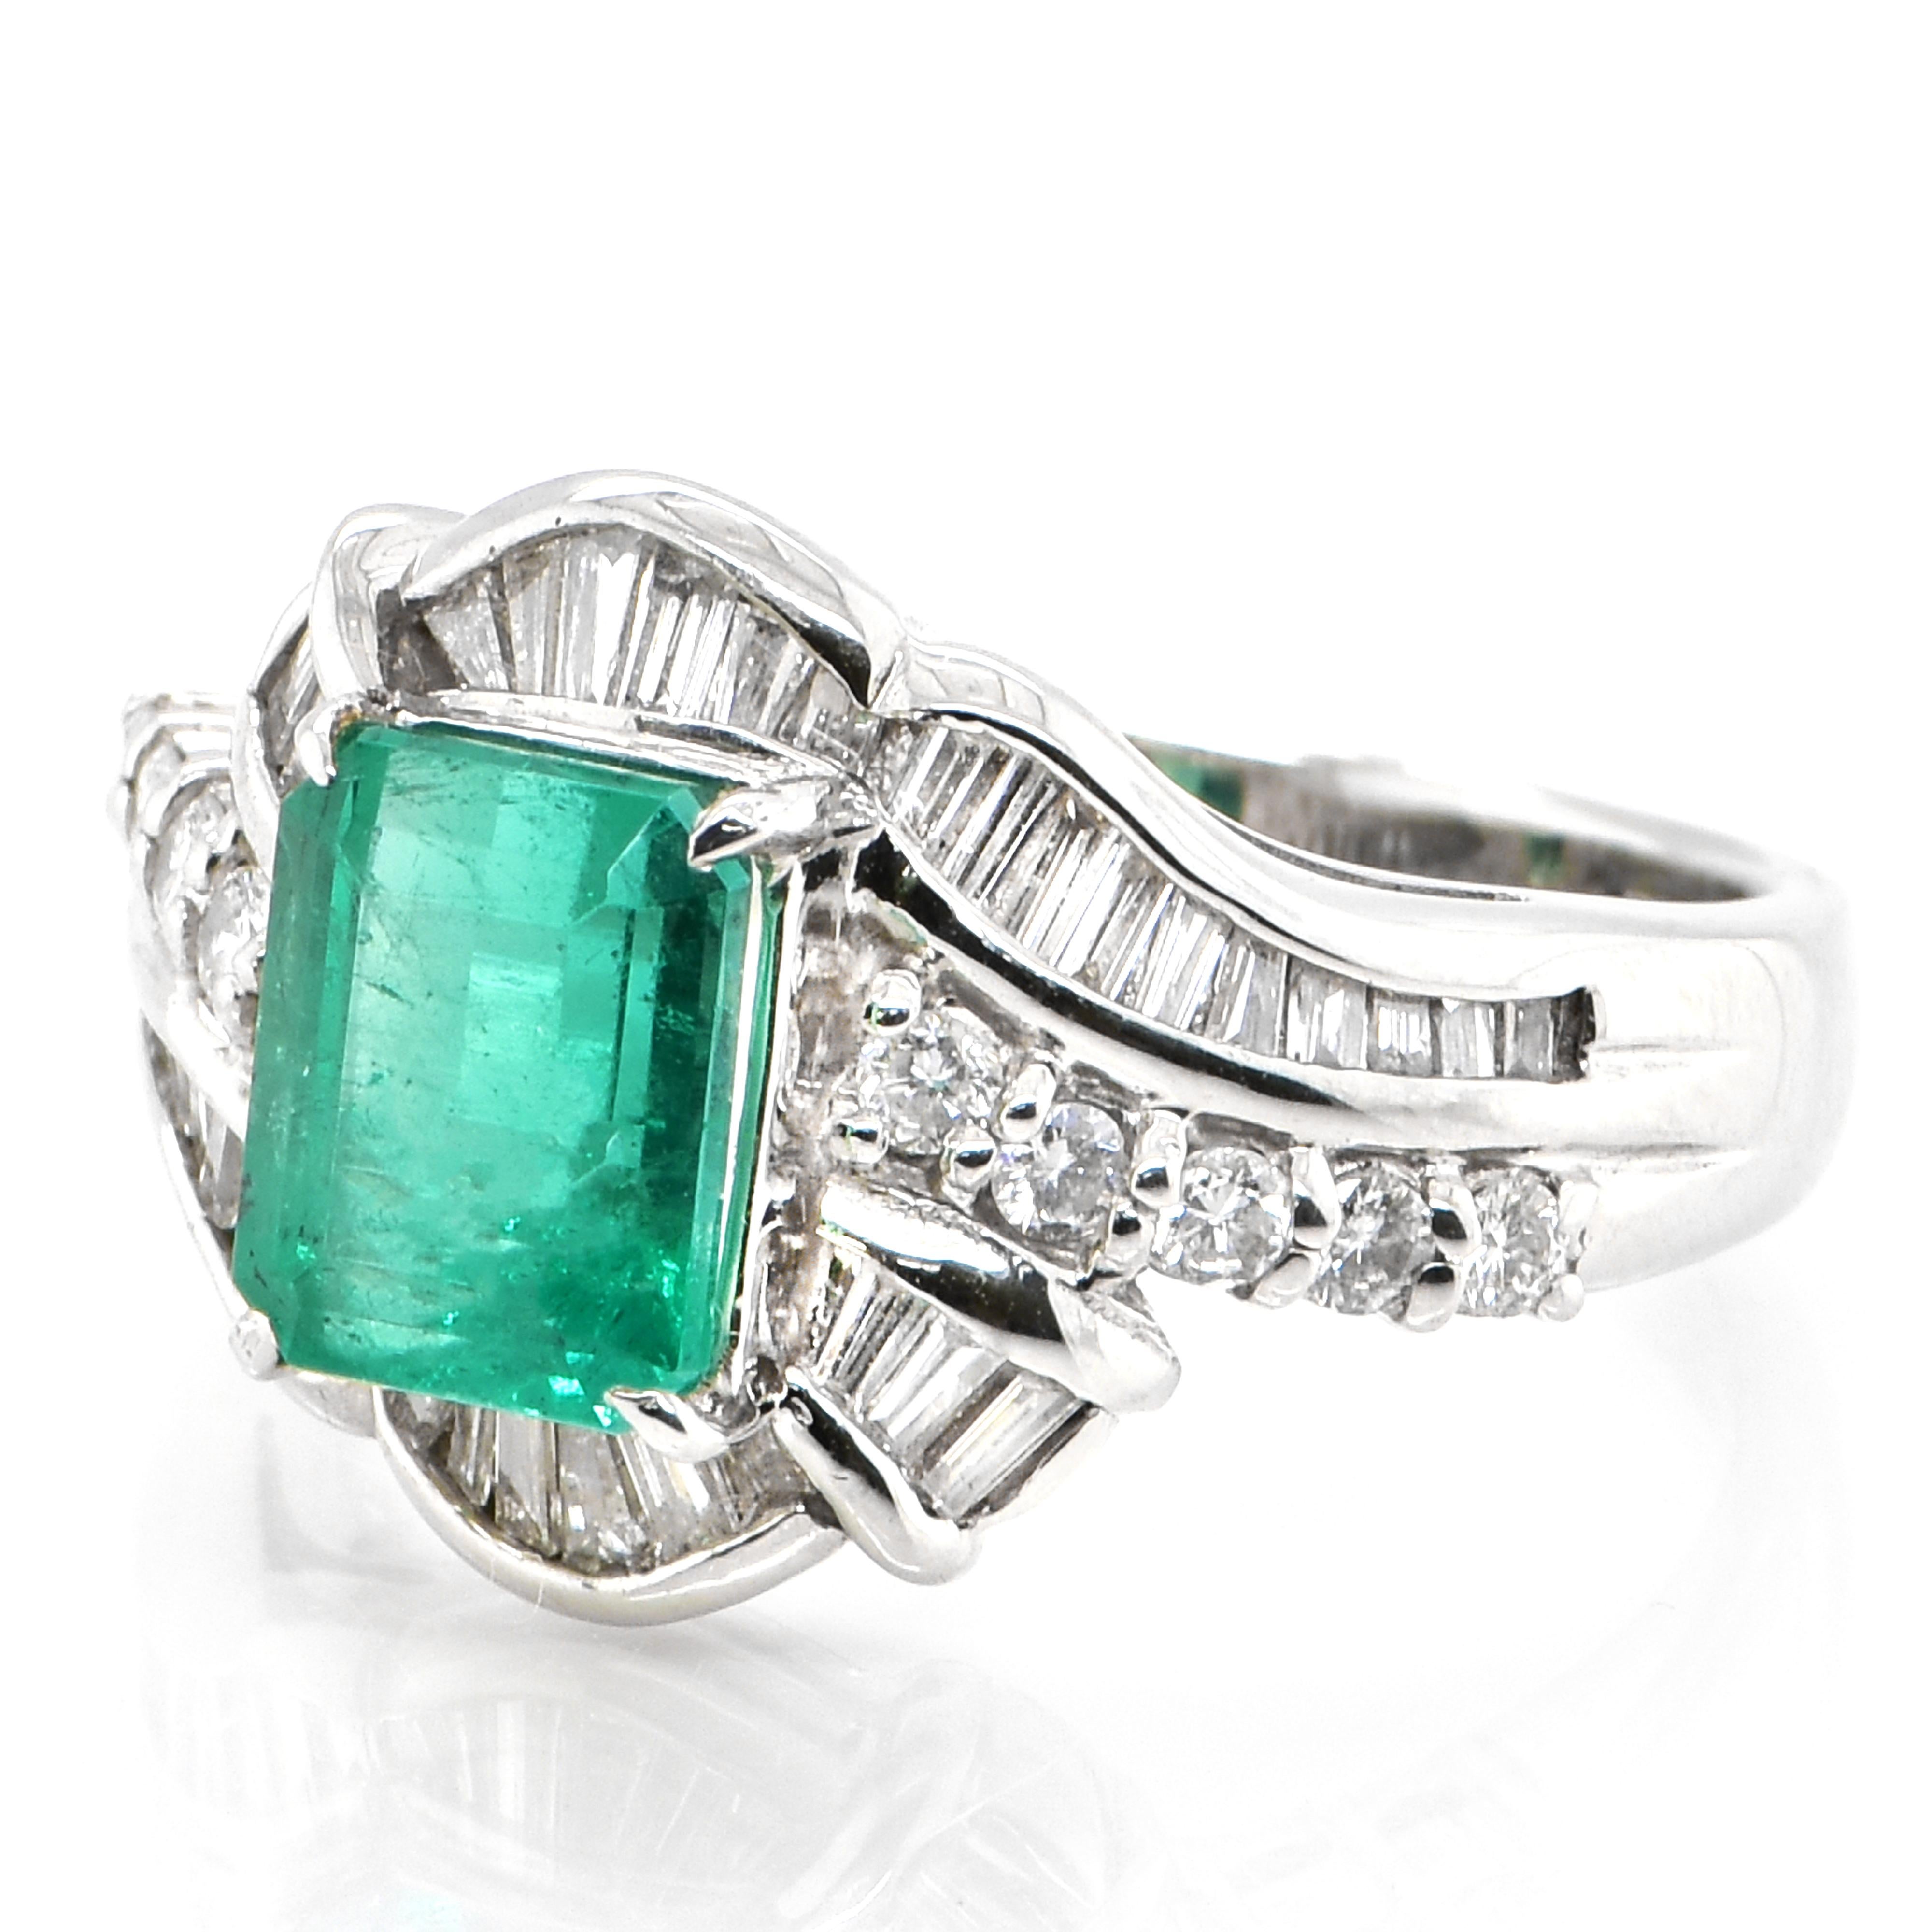 A stunning ring featuring a 1.83 Carat Natural Emerald and 0.69 Carats of Diamond Accents set in Platinum. People have admired emerald’s green for thousands of years. Emeralds have always been associated with the lushest landscapes and the richest